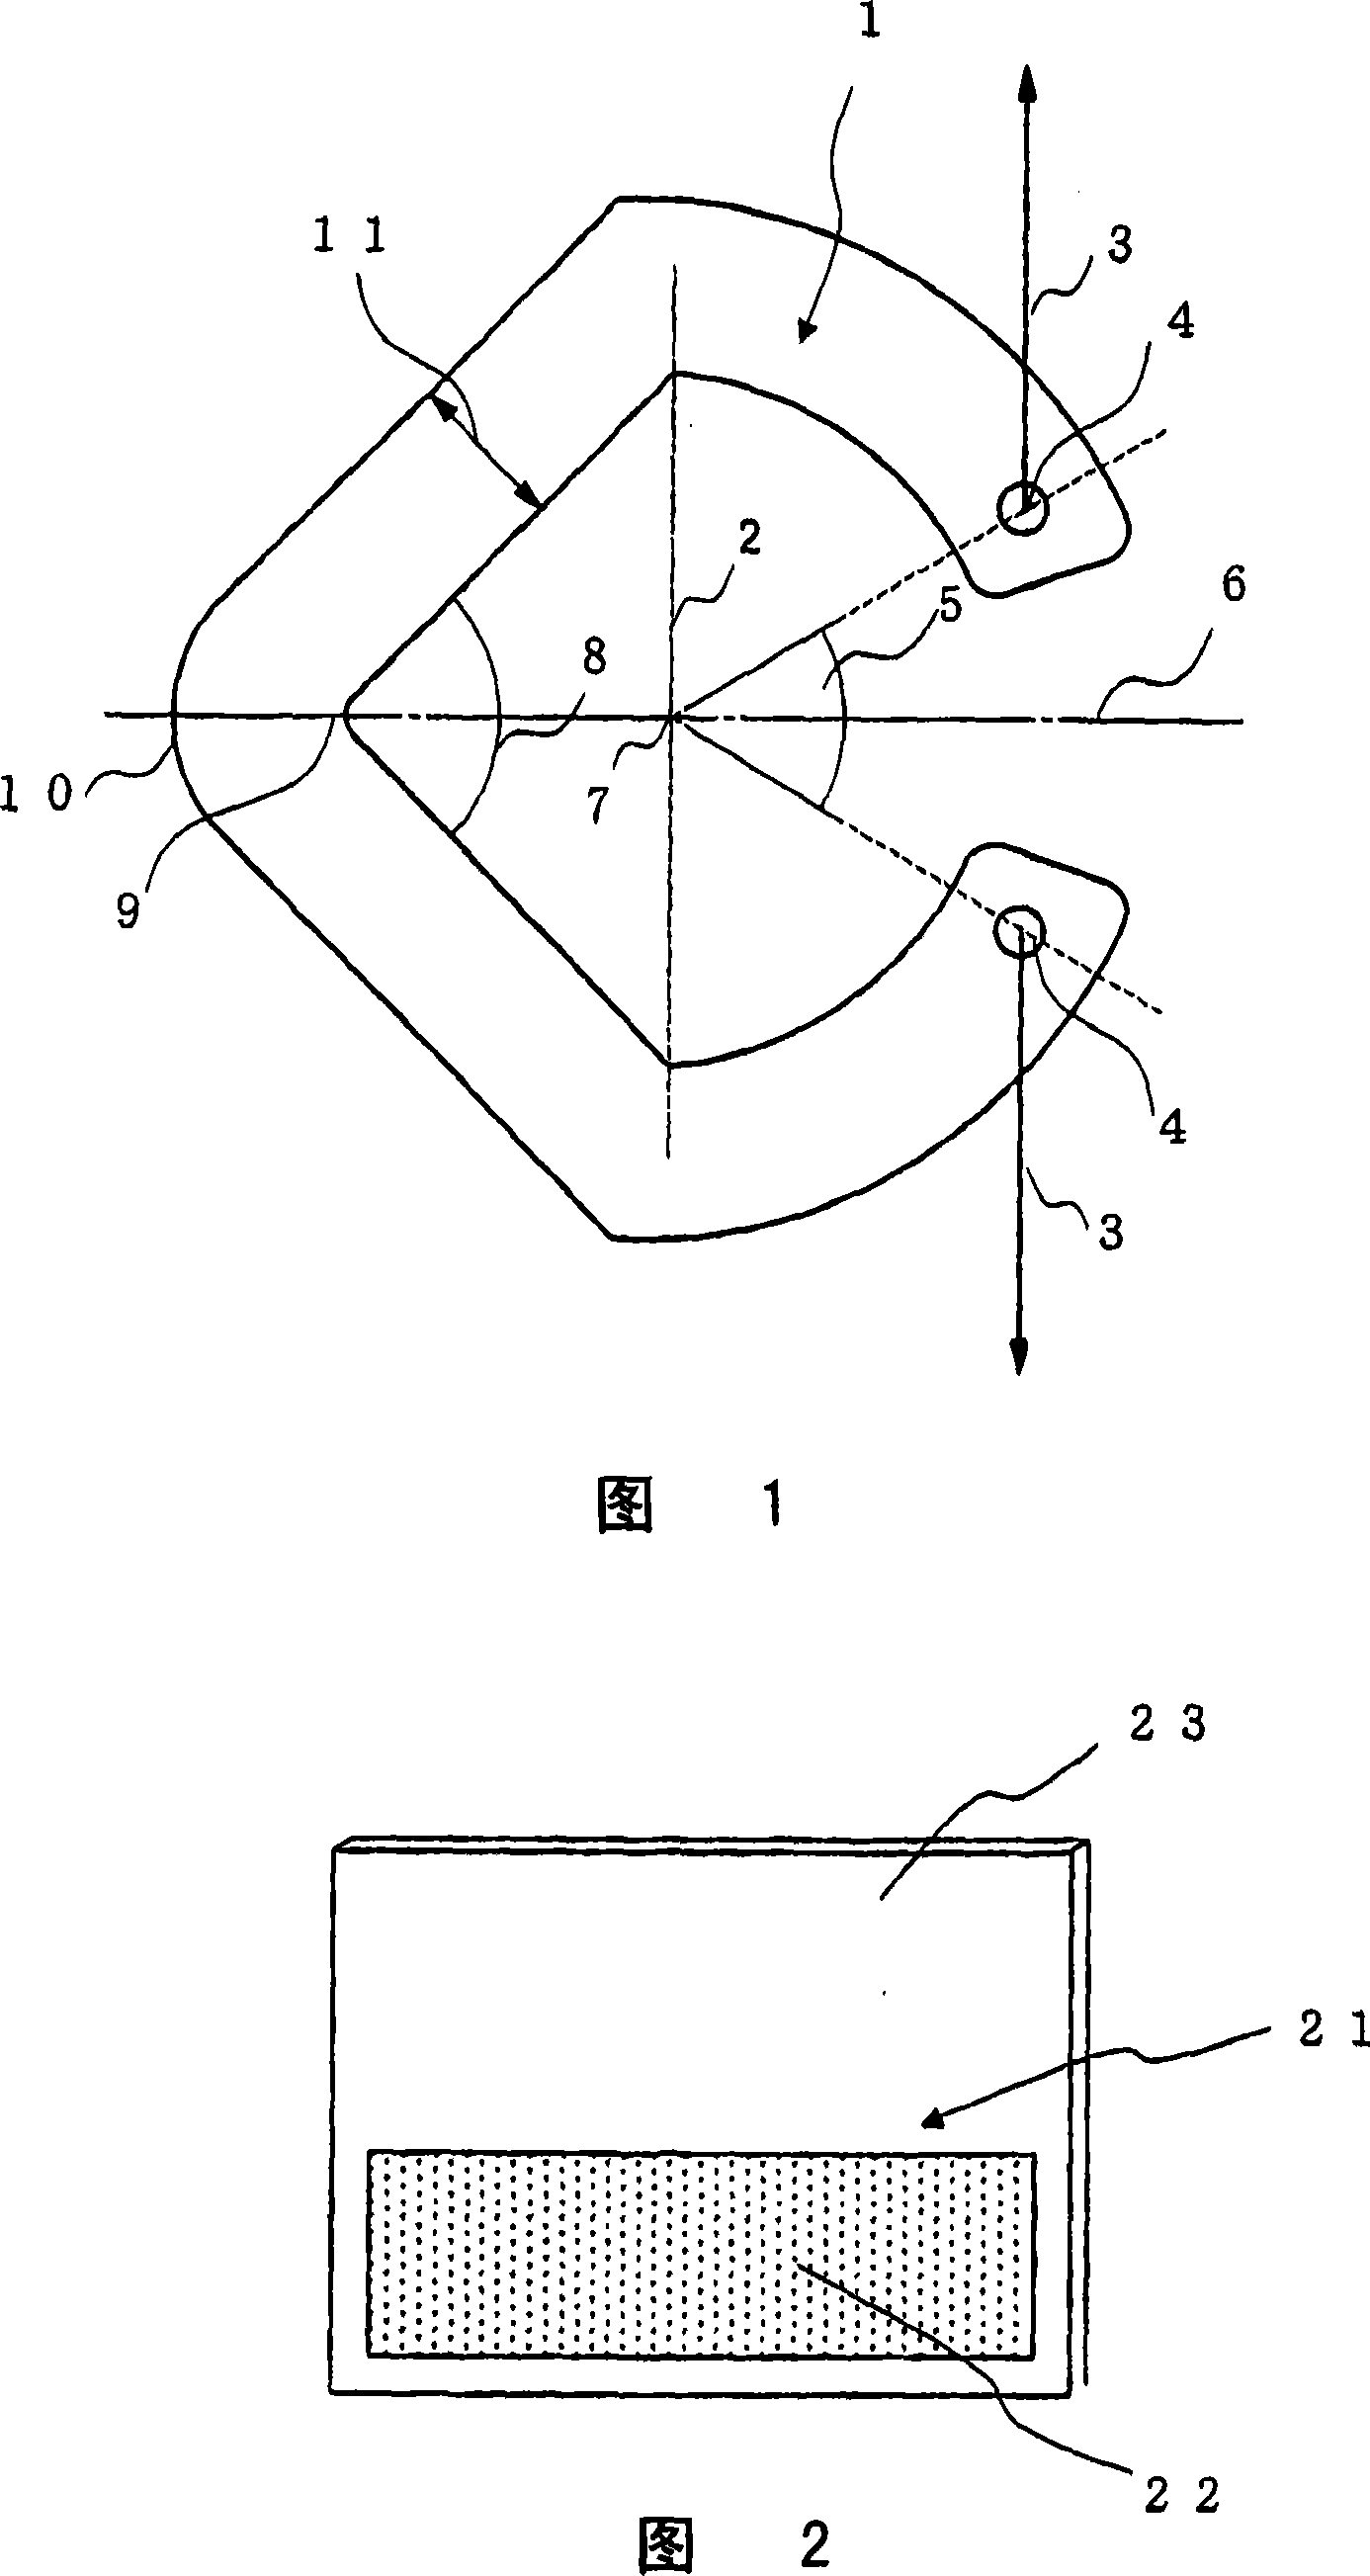 Aromatic polycarbonate resin composition and process for producing the same